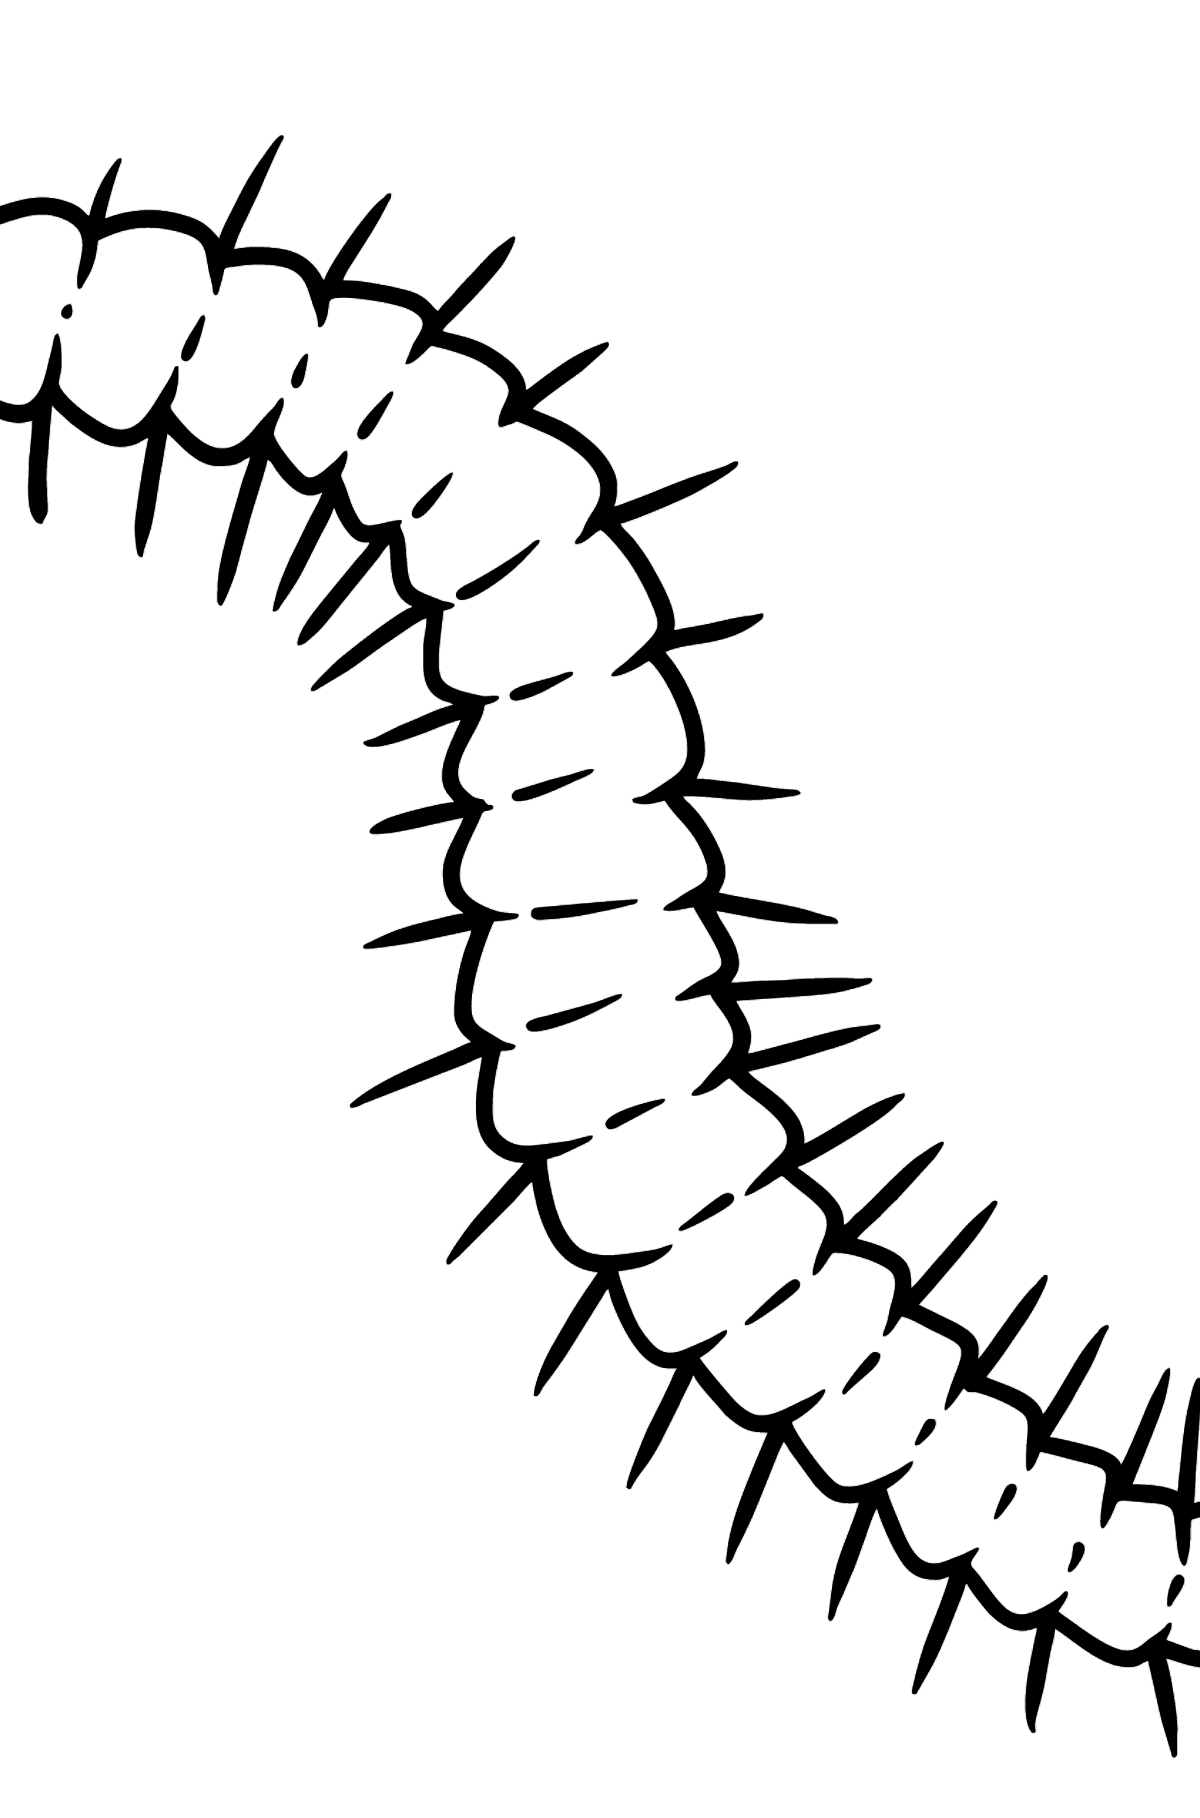 Centipede coloring page - Coloring Pages for Kids